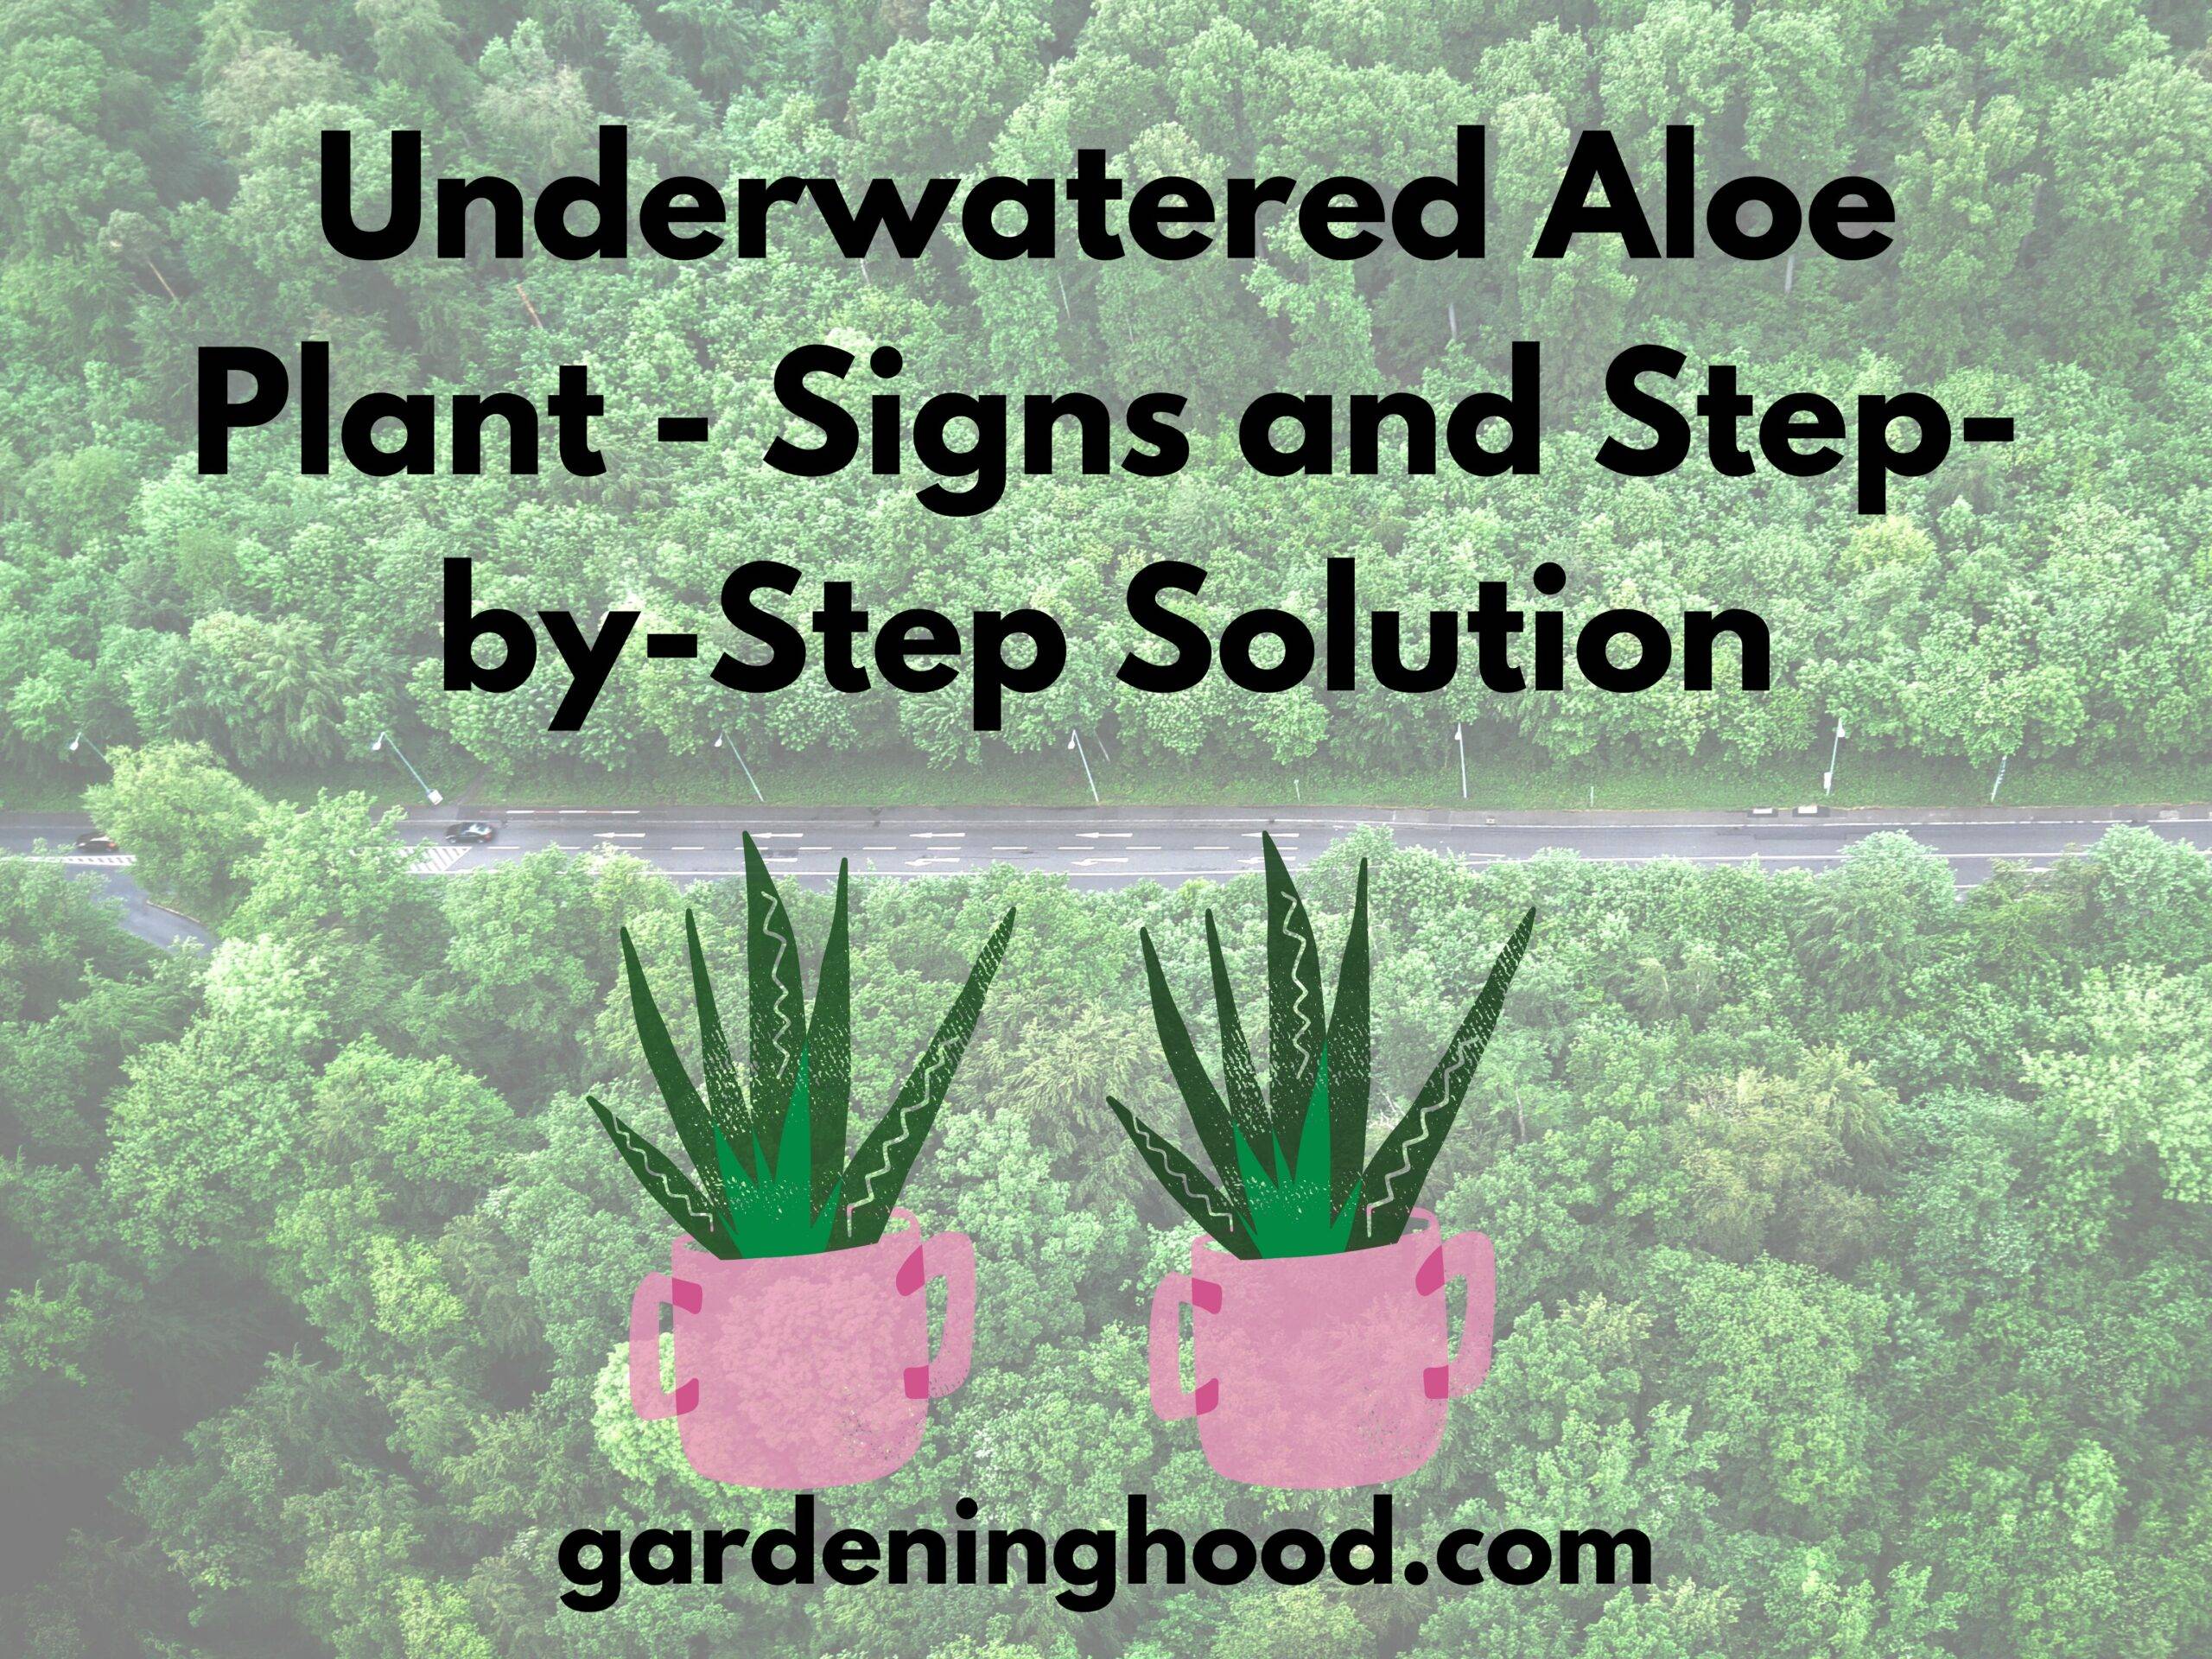 Underwatered Aloe Plant - Signs and Step-by-Step Solution